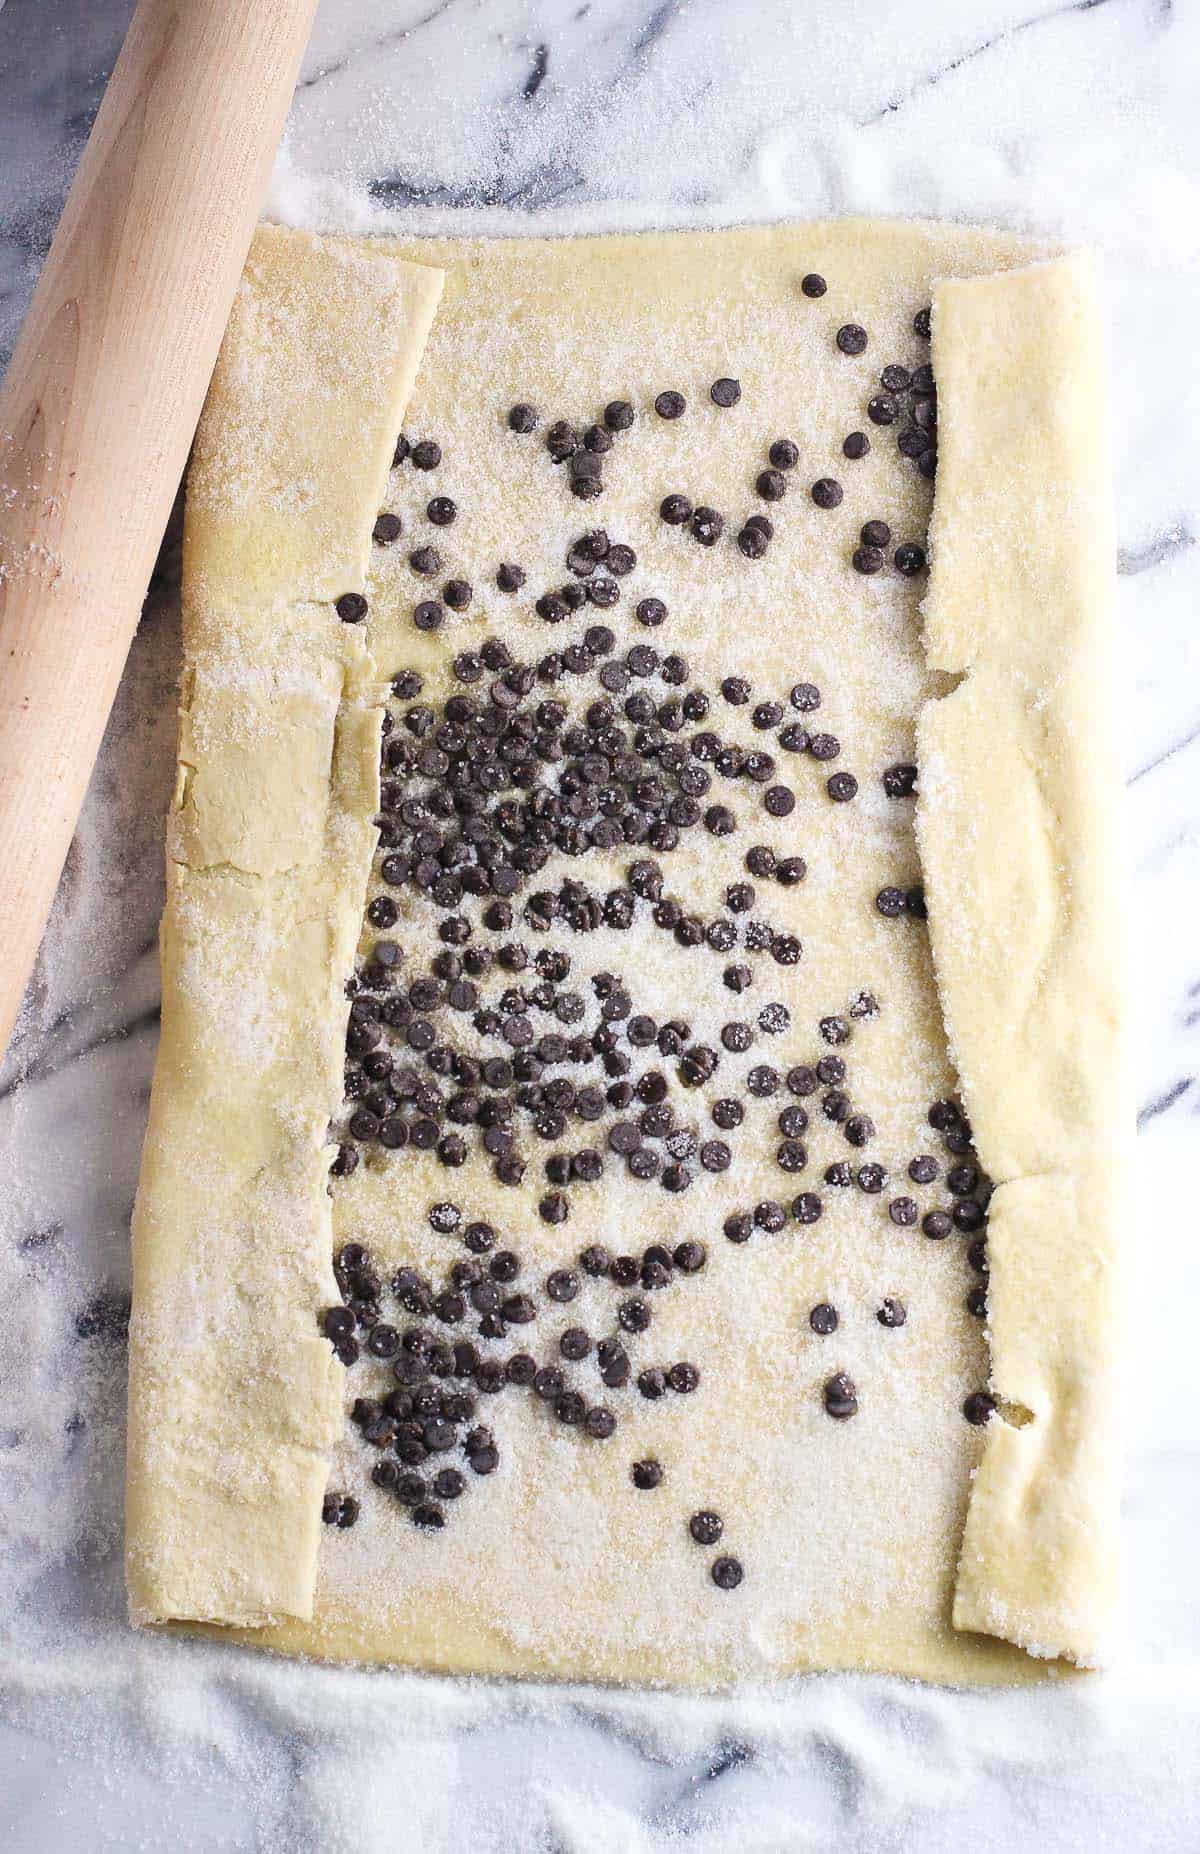 Mini chocolate chips spread onto a sugar-coated sheet of puff pastry